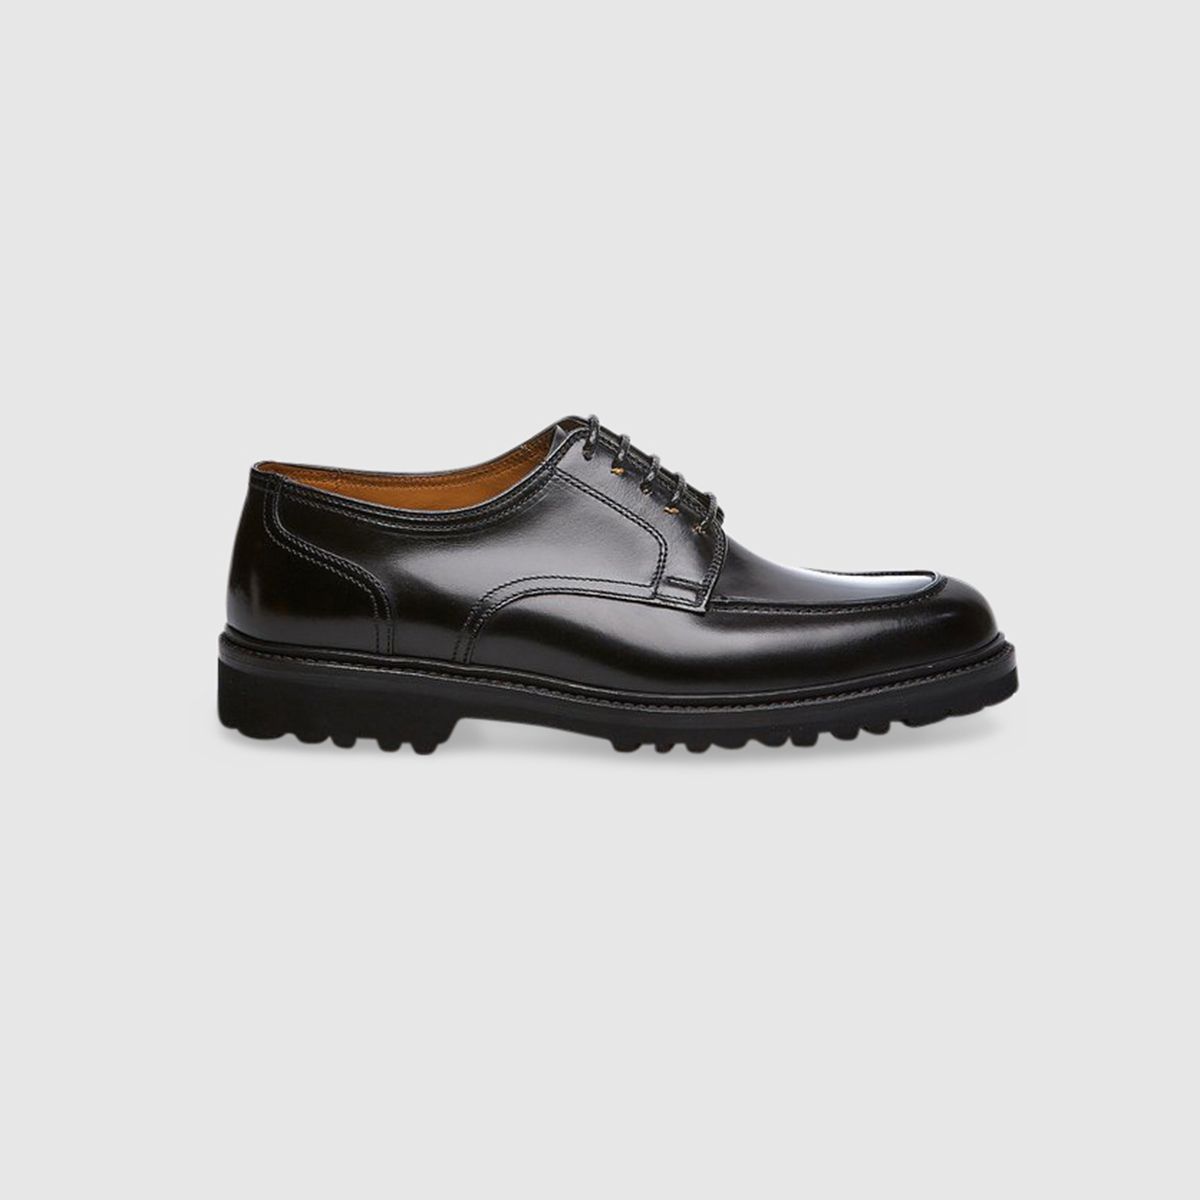 Five Hole Lace-up Shoes in Black Calfskin Gruppo Fabi on sale 2022